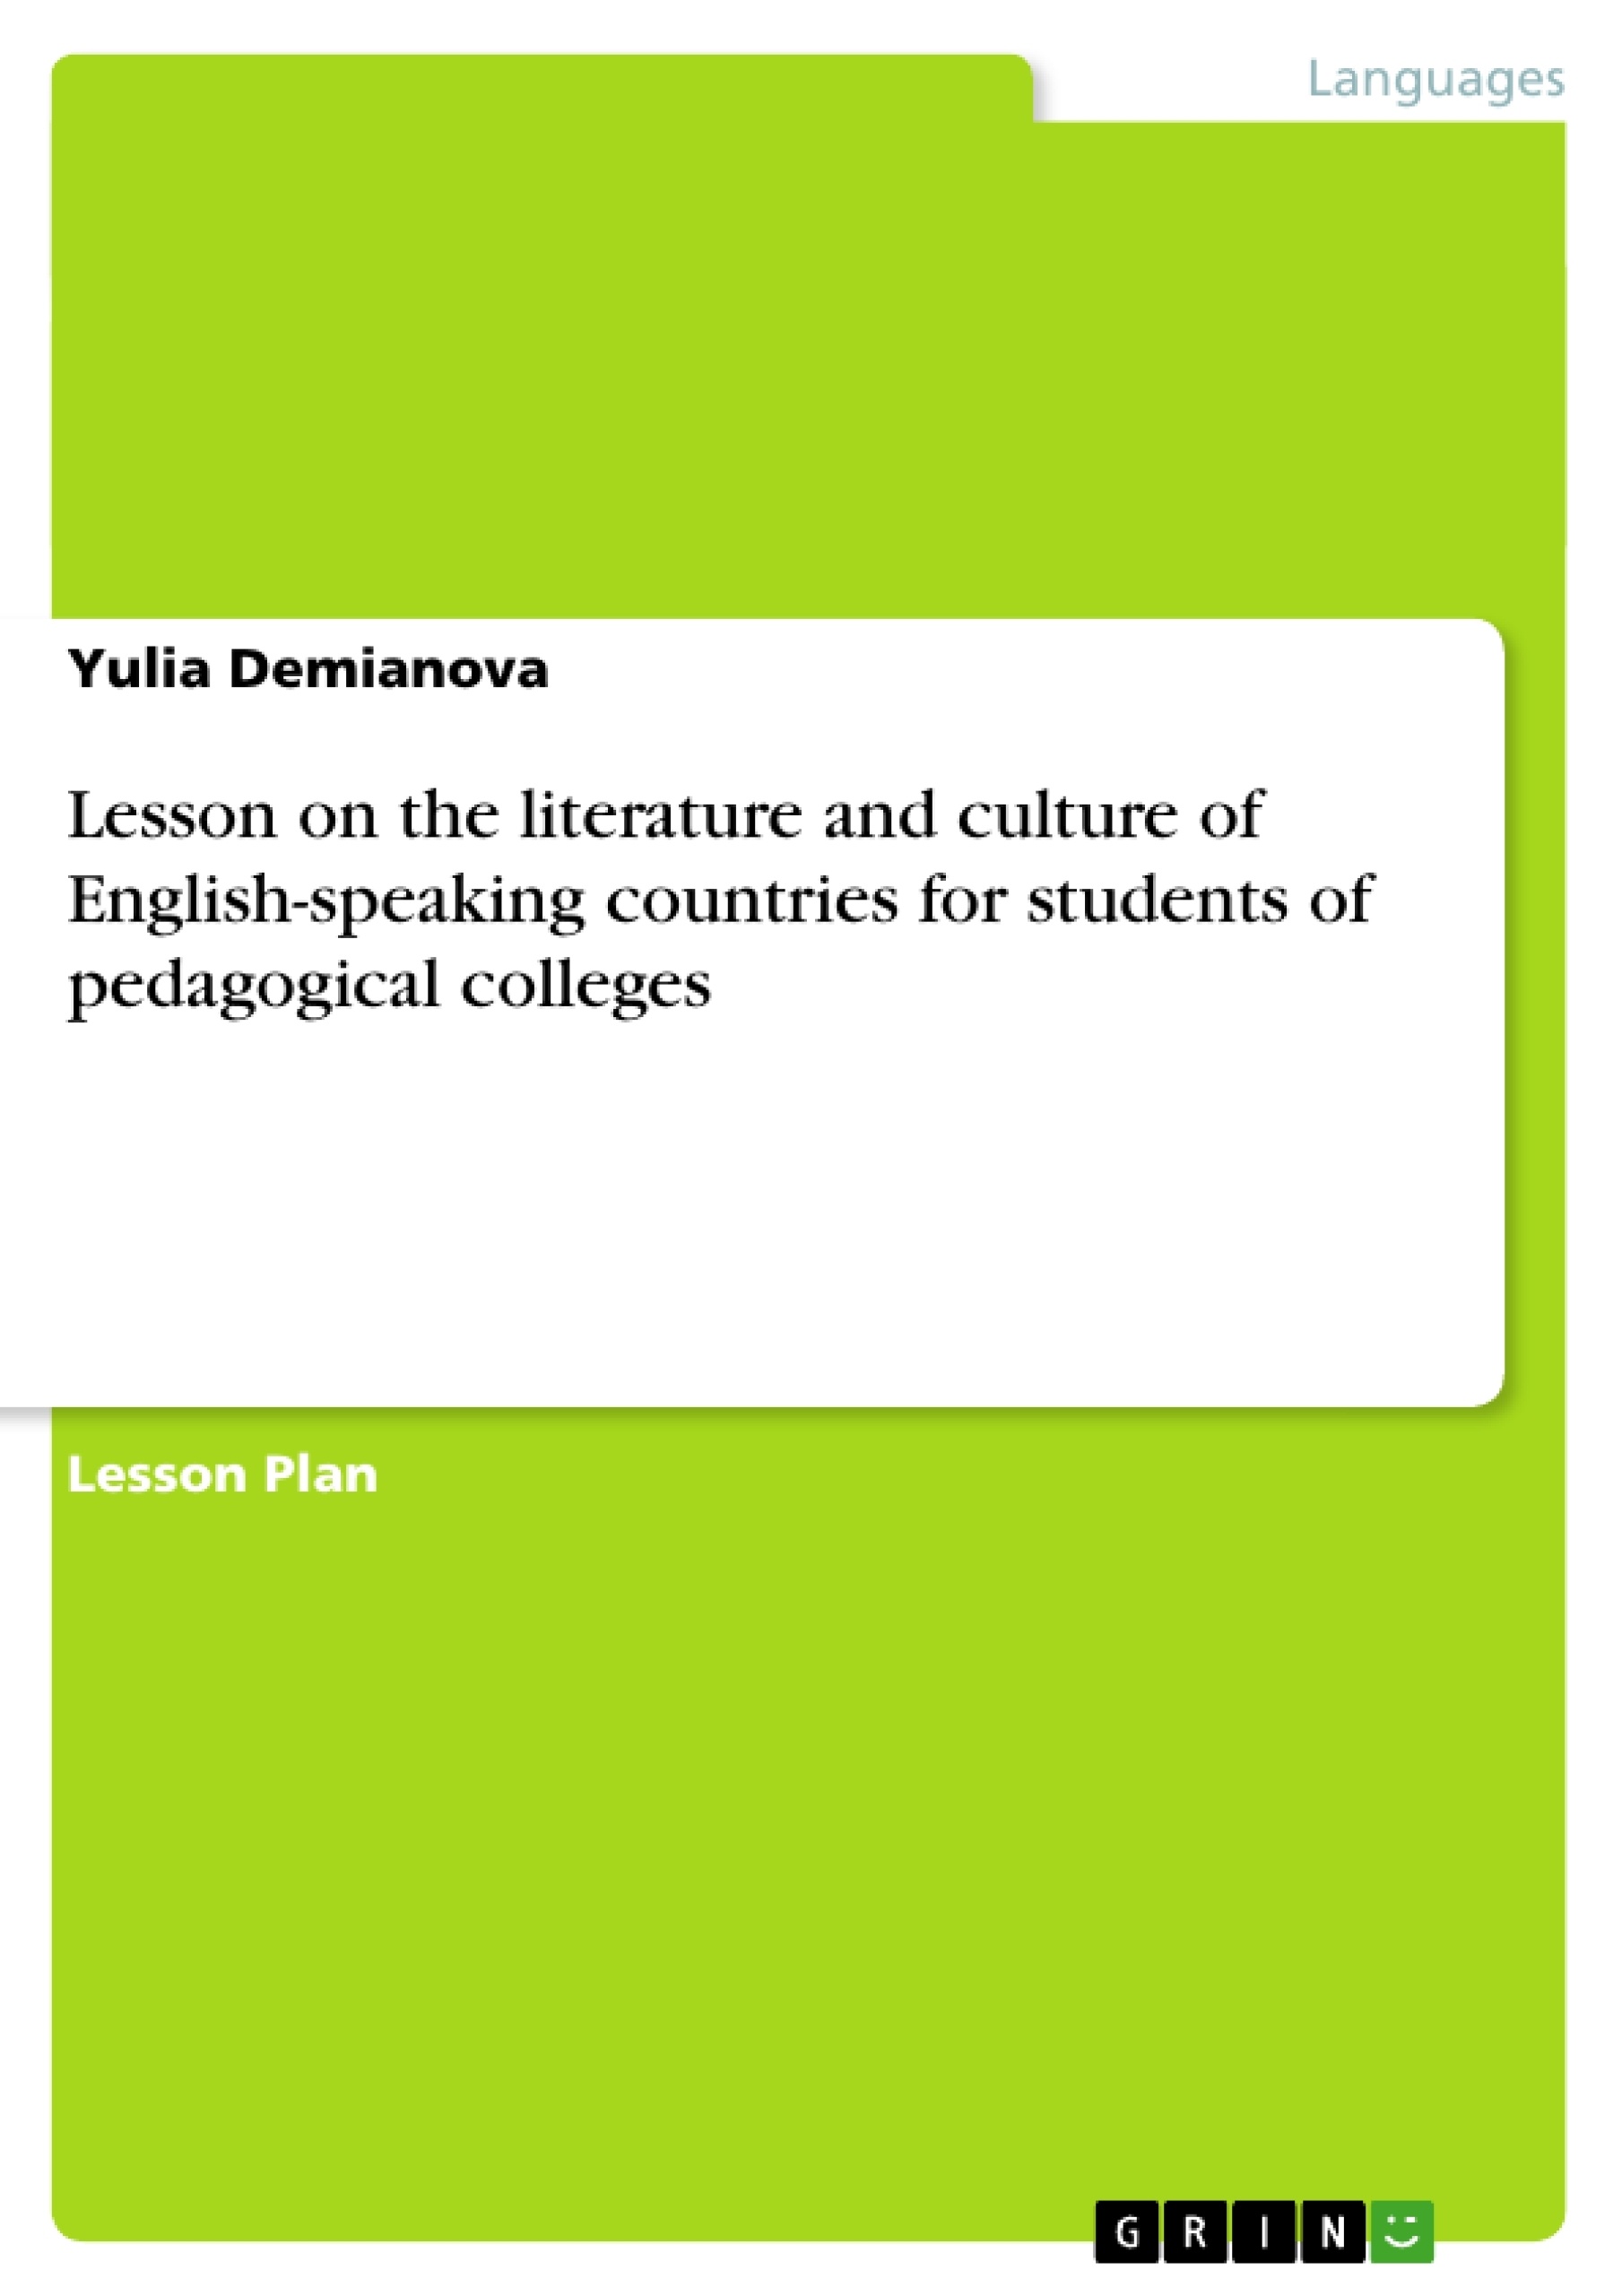 Title: Lesson on the literature and culture of English-speaking countries for students of pedagogical colleges